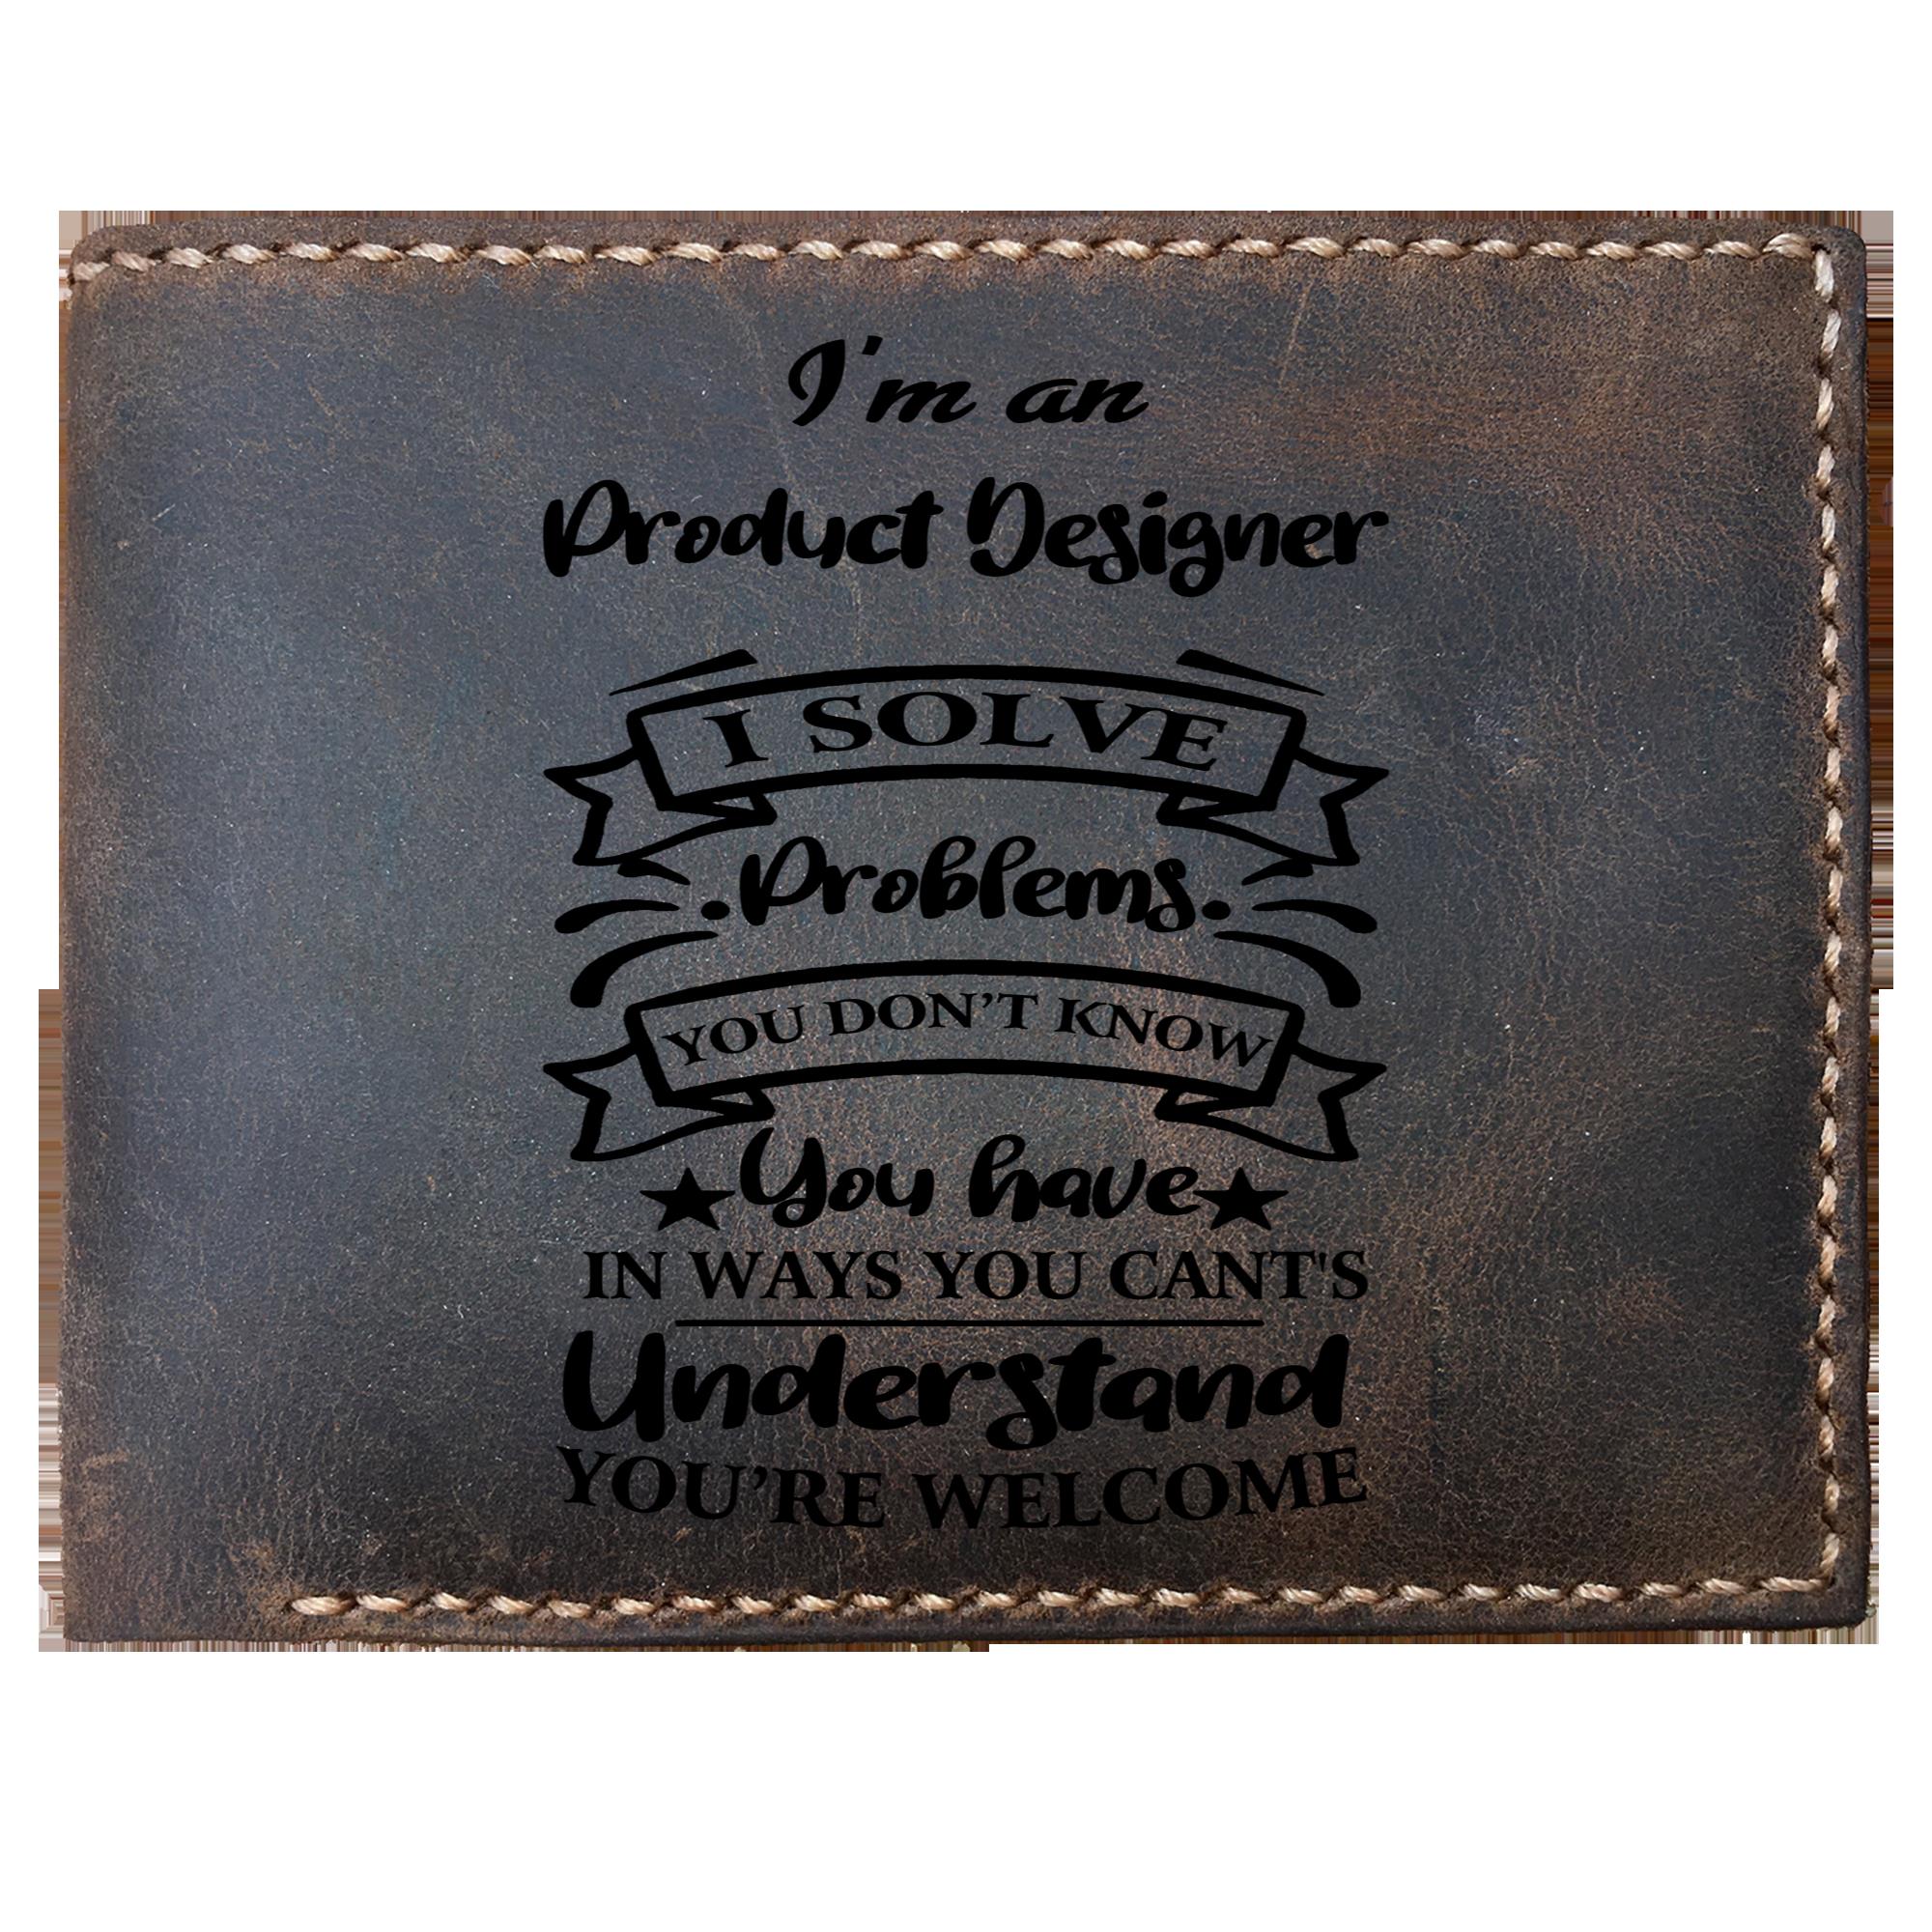 Skitongifts Funny Custom Laser Engraved Bifold Leather Wallet For Men, I'm an Product Designer Solve Problems, Father's Day Gifts